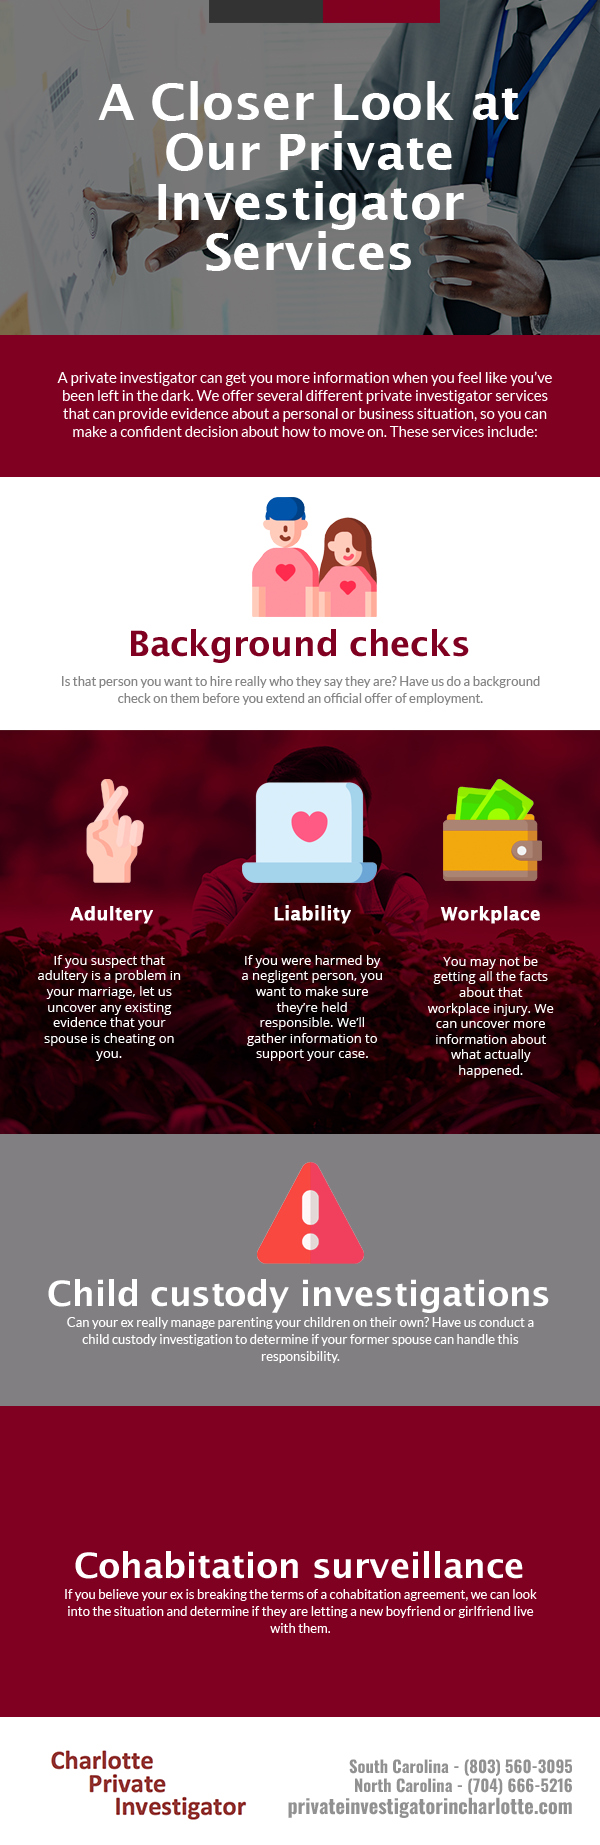 A Closer Look at Our Private Investigator Services [infographic]